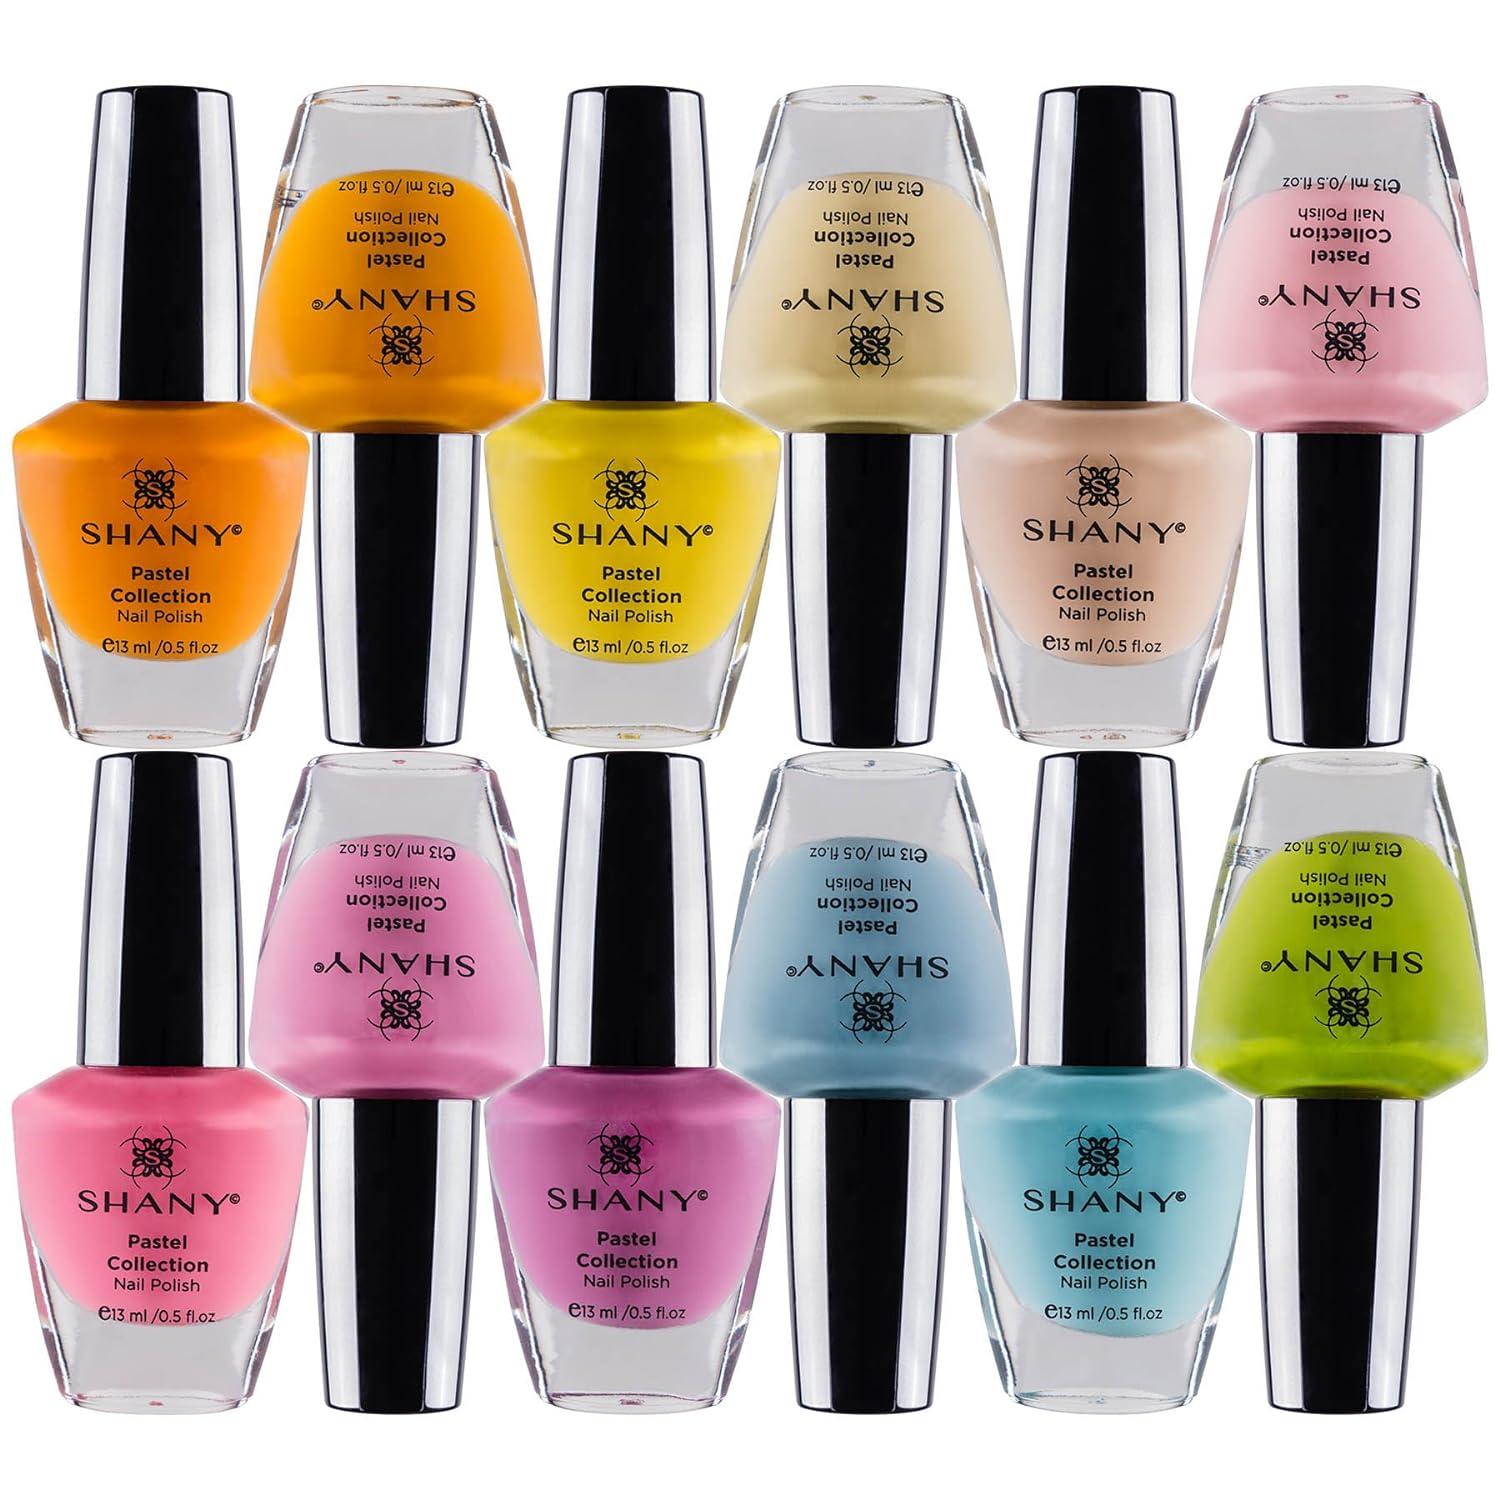 SHANY Nail Polish Set - The Pastel Collection, 12 units - Foods Co.